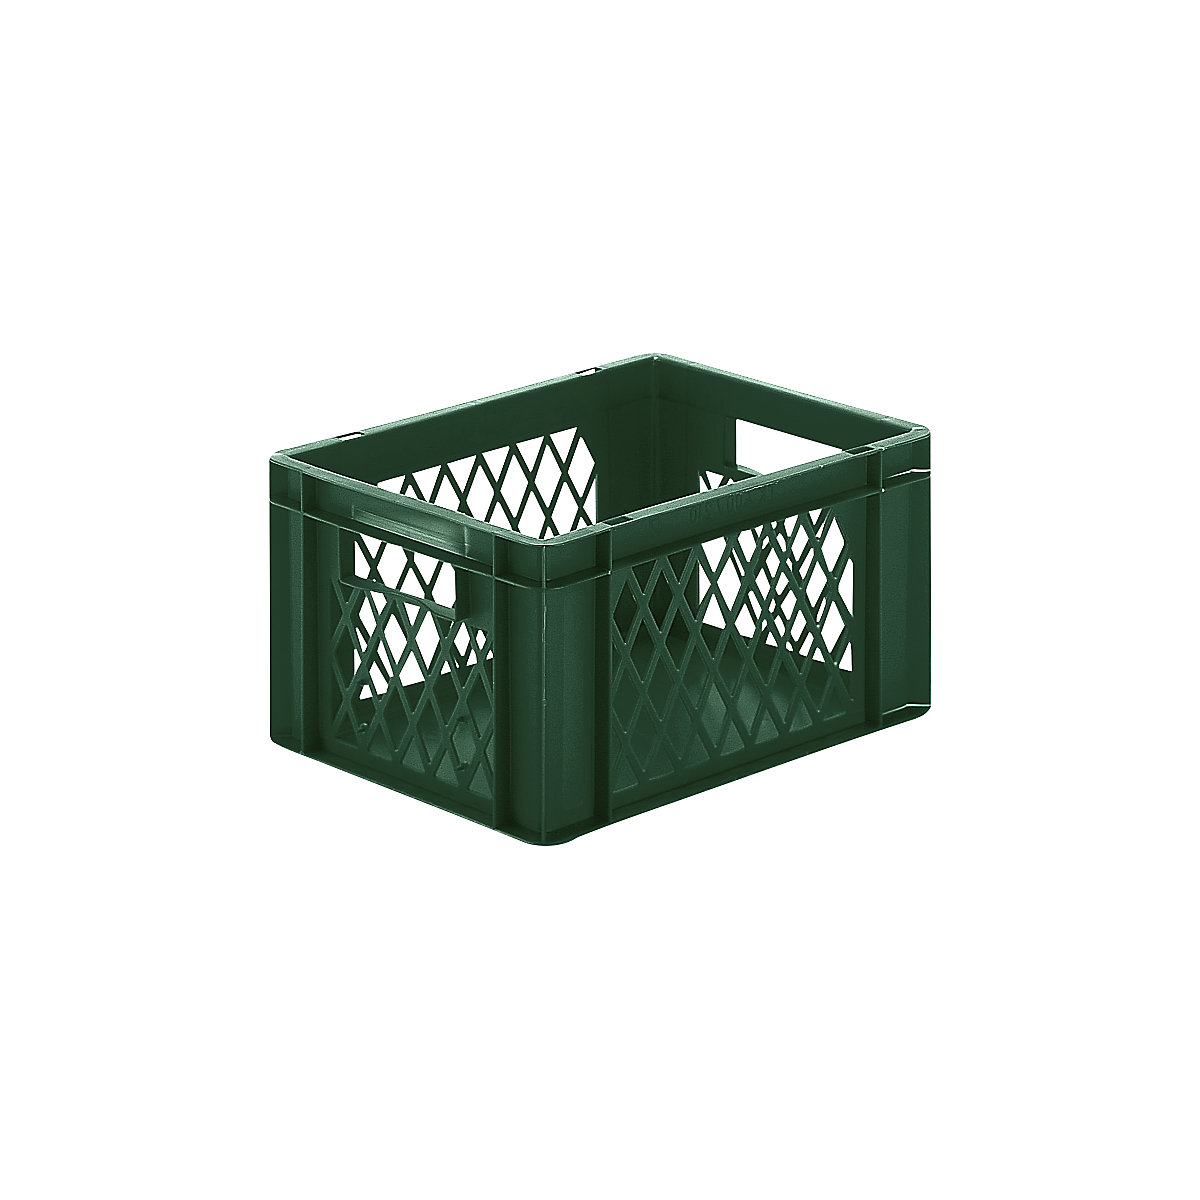 Euro stacking container, perforated walls, closed base, LxWxH 400 x 300 x 210 mm, green, pack of 5-6